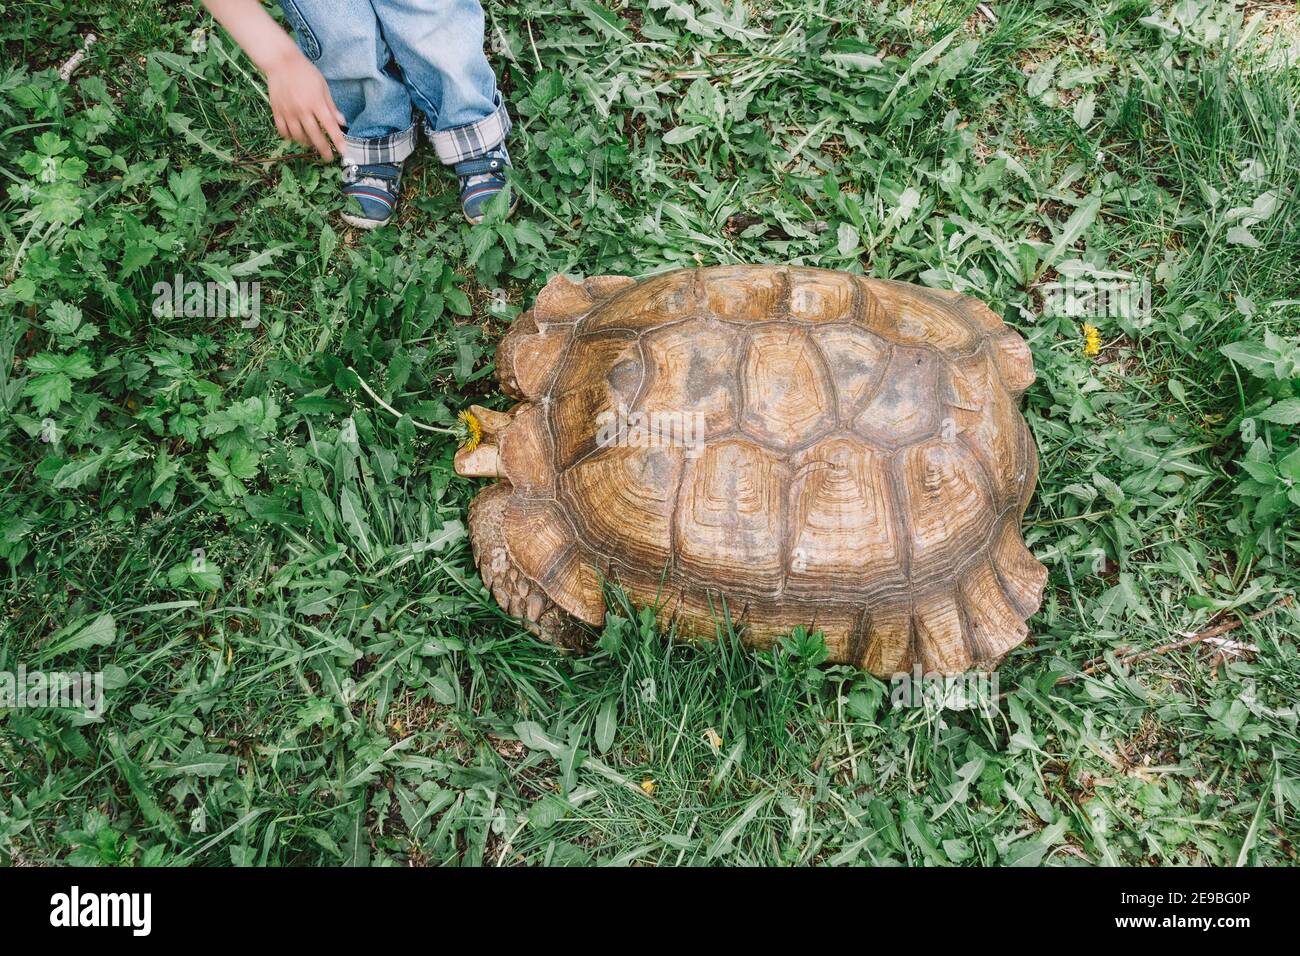 Giant turtle in the green grass. The child feeds the turtle with dandelions. Close-up. Stock Photo